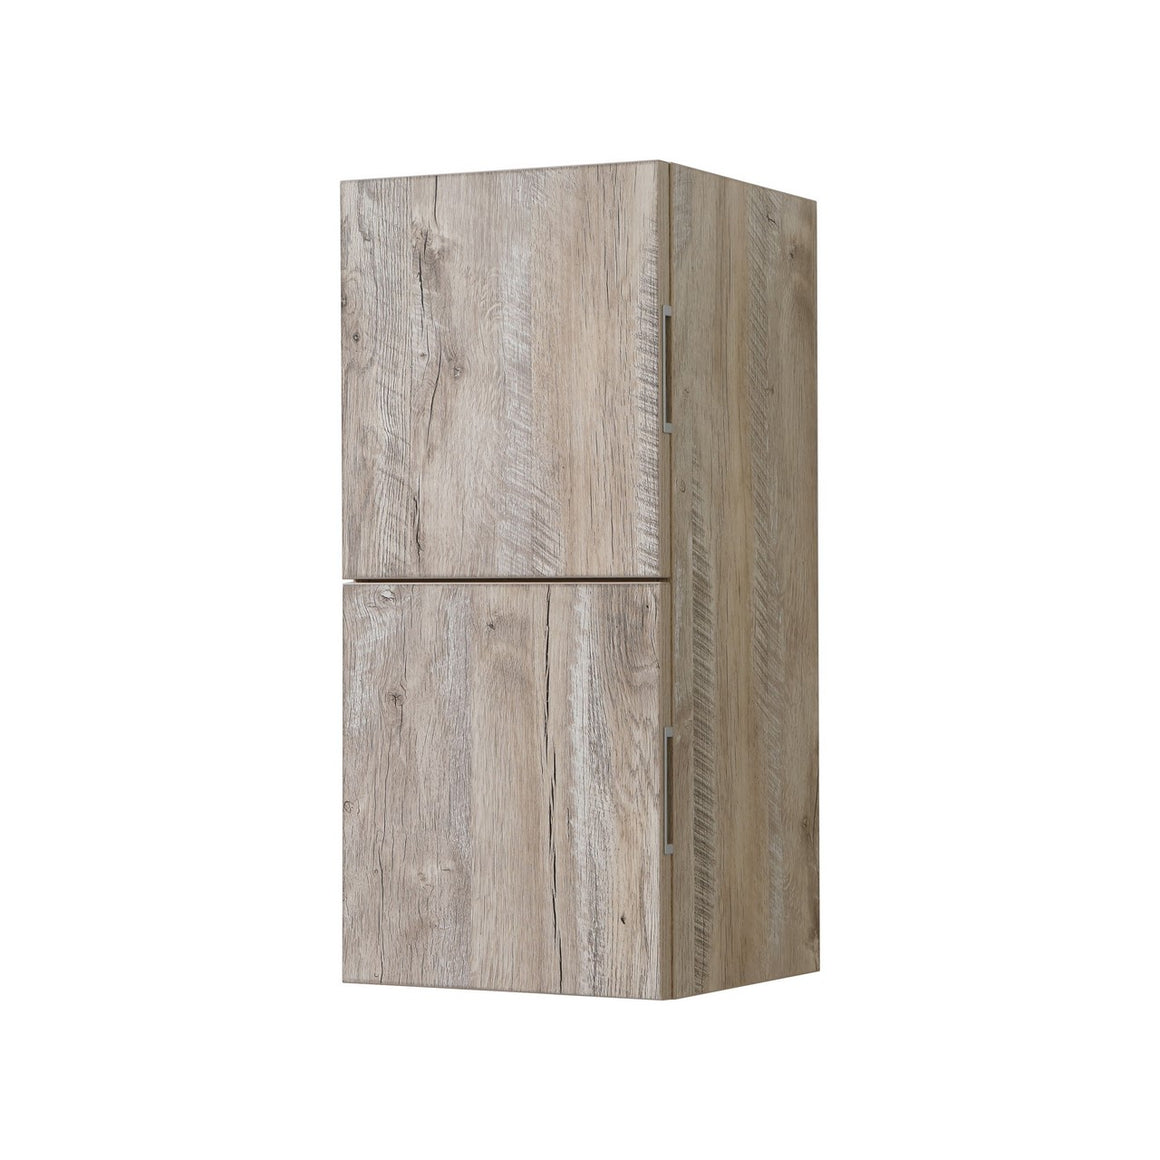 Bliss 12" Wide by 24" High Linen Side Cabinet With Two Doors in Nature Wood Finish